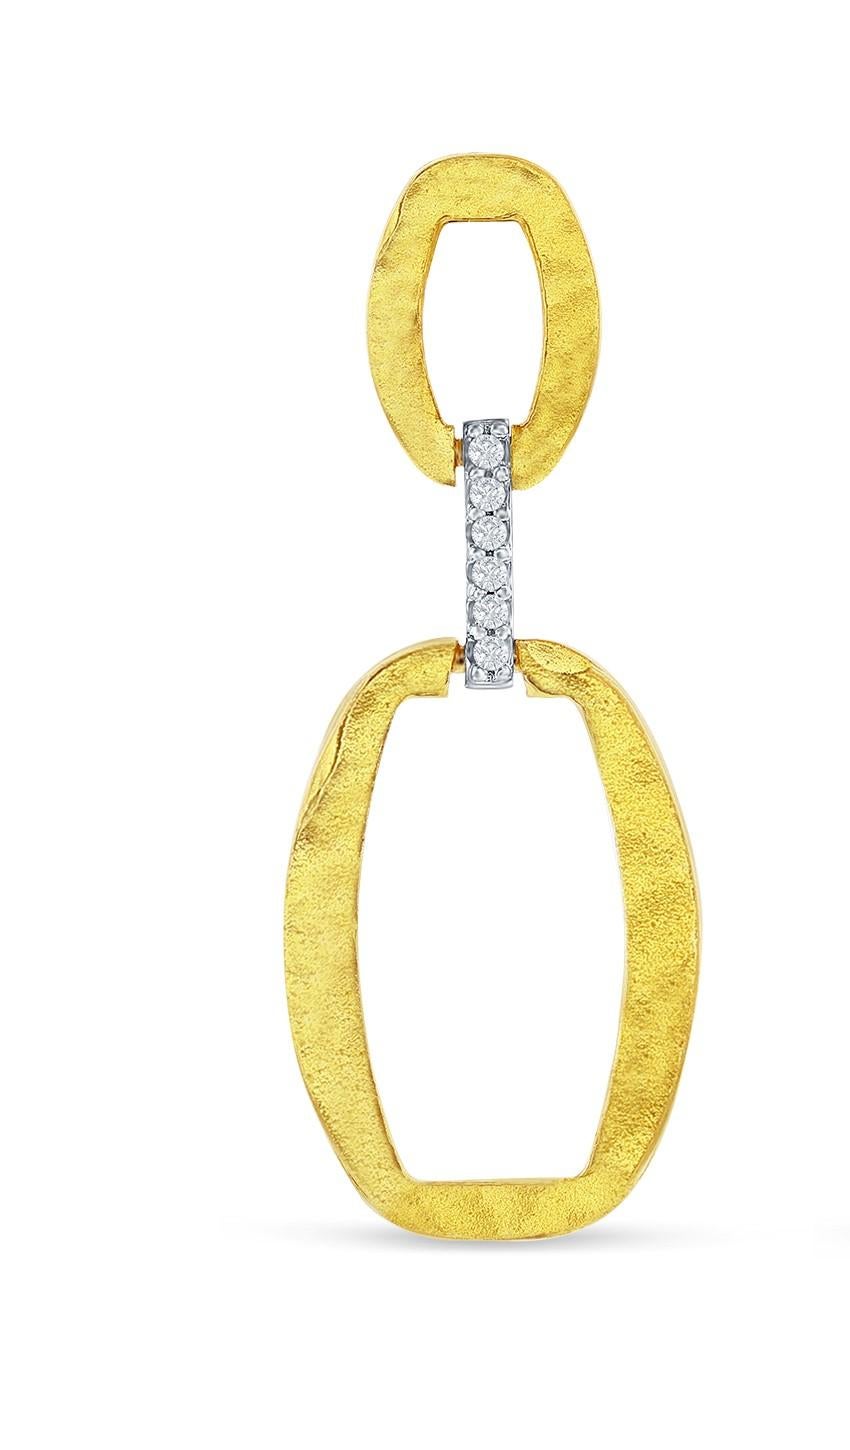 14 Karat Yellow Gold Hand-Crafted Matte and Hammer-Finished Dangling Open Ellipse Link Earrings, Accented with 0.07 Carats of Pave Set Diamonds.  Push Back Post Closure.
